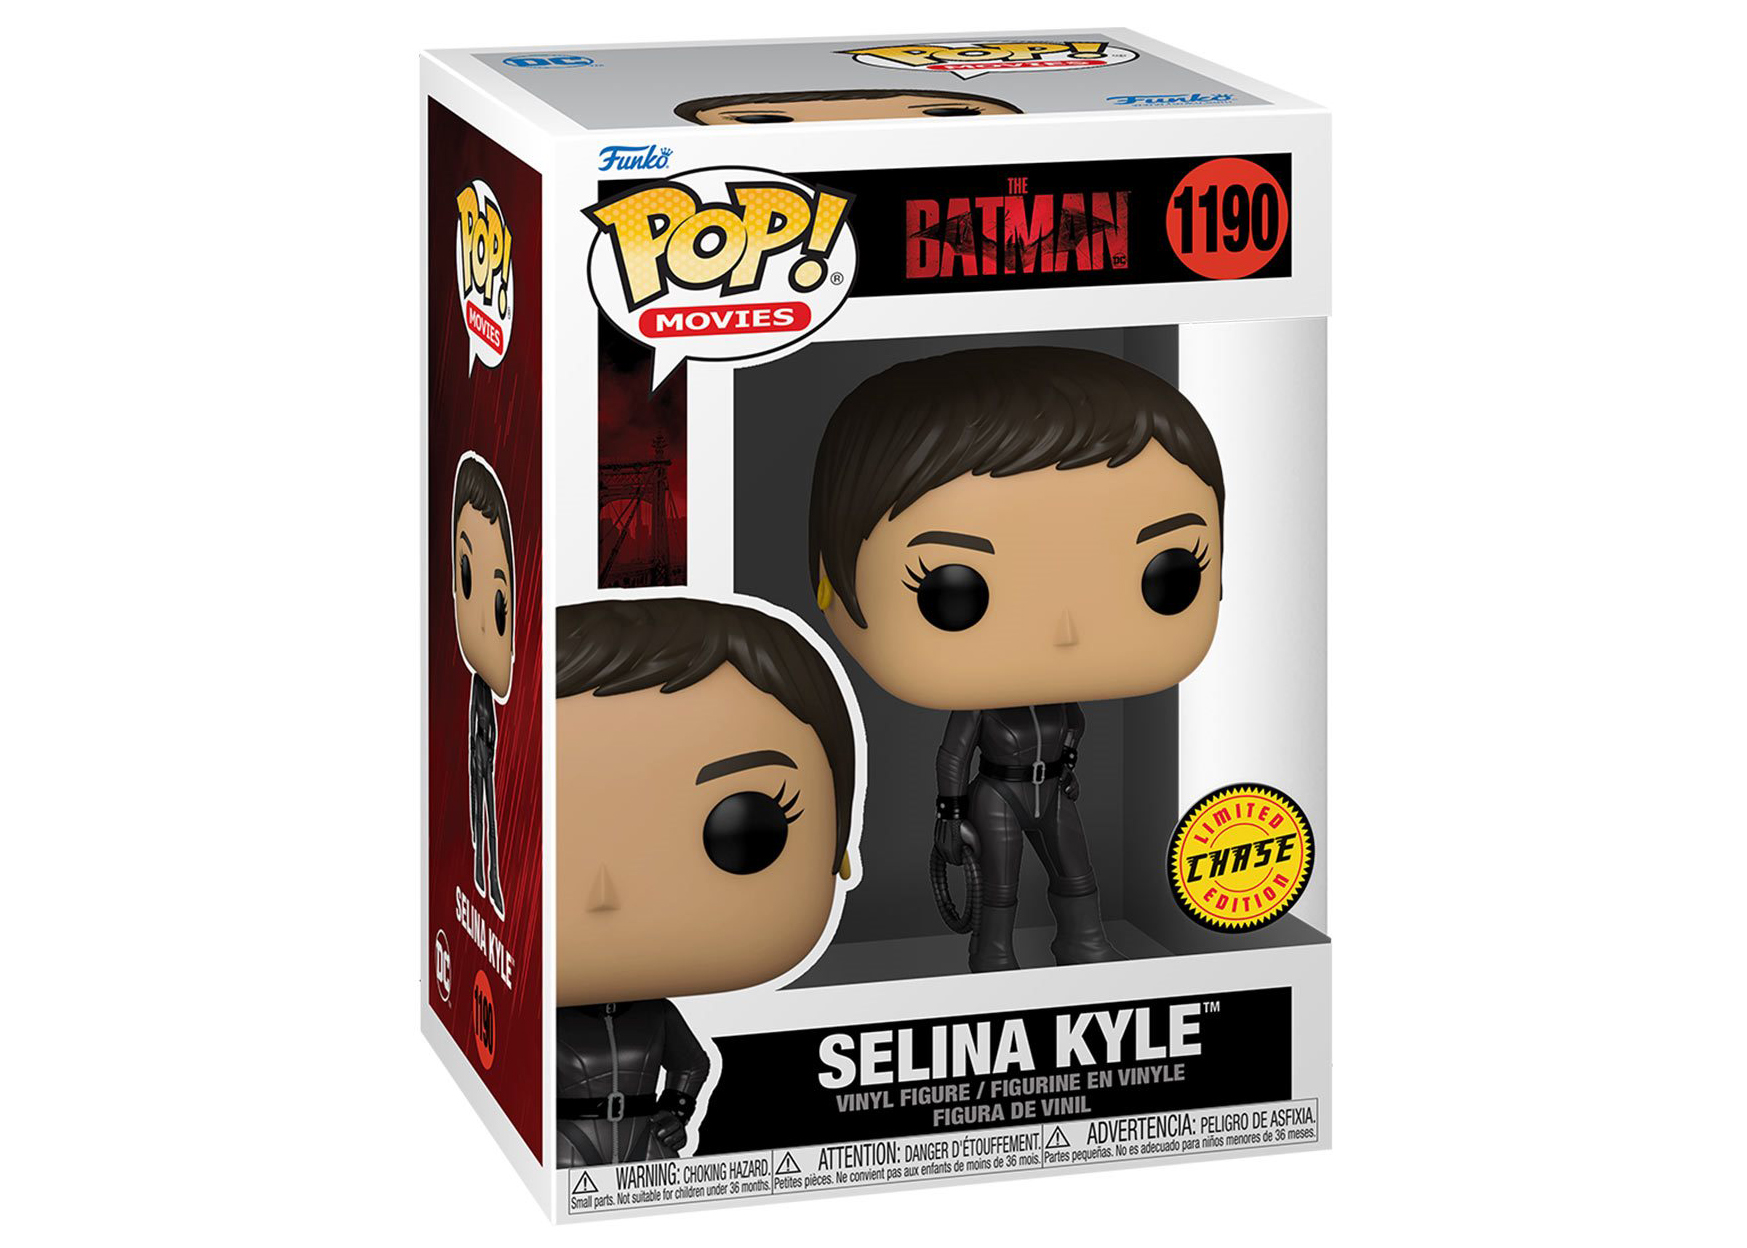 Funko Pop! Movies The Batman Selina Kyle Chase Exclusive Figure